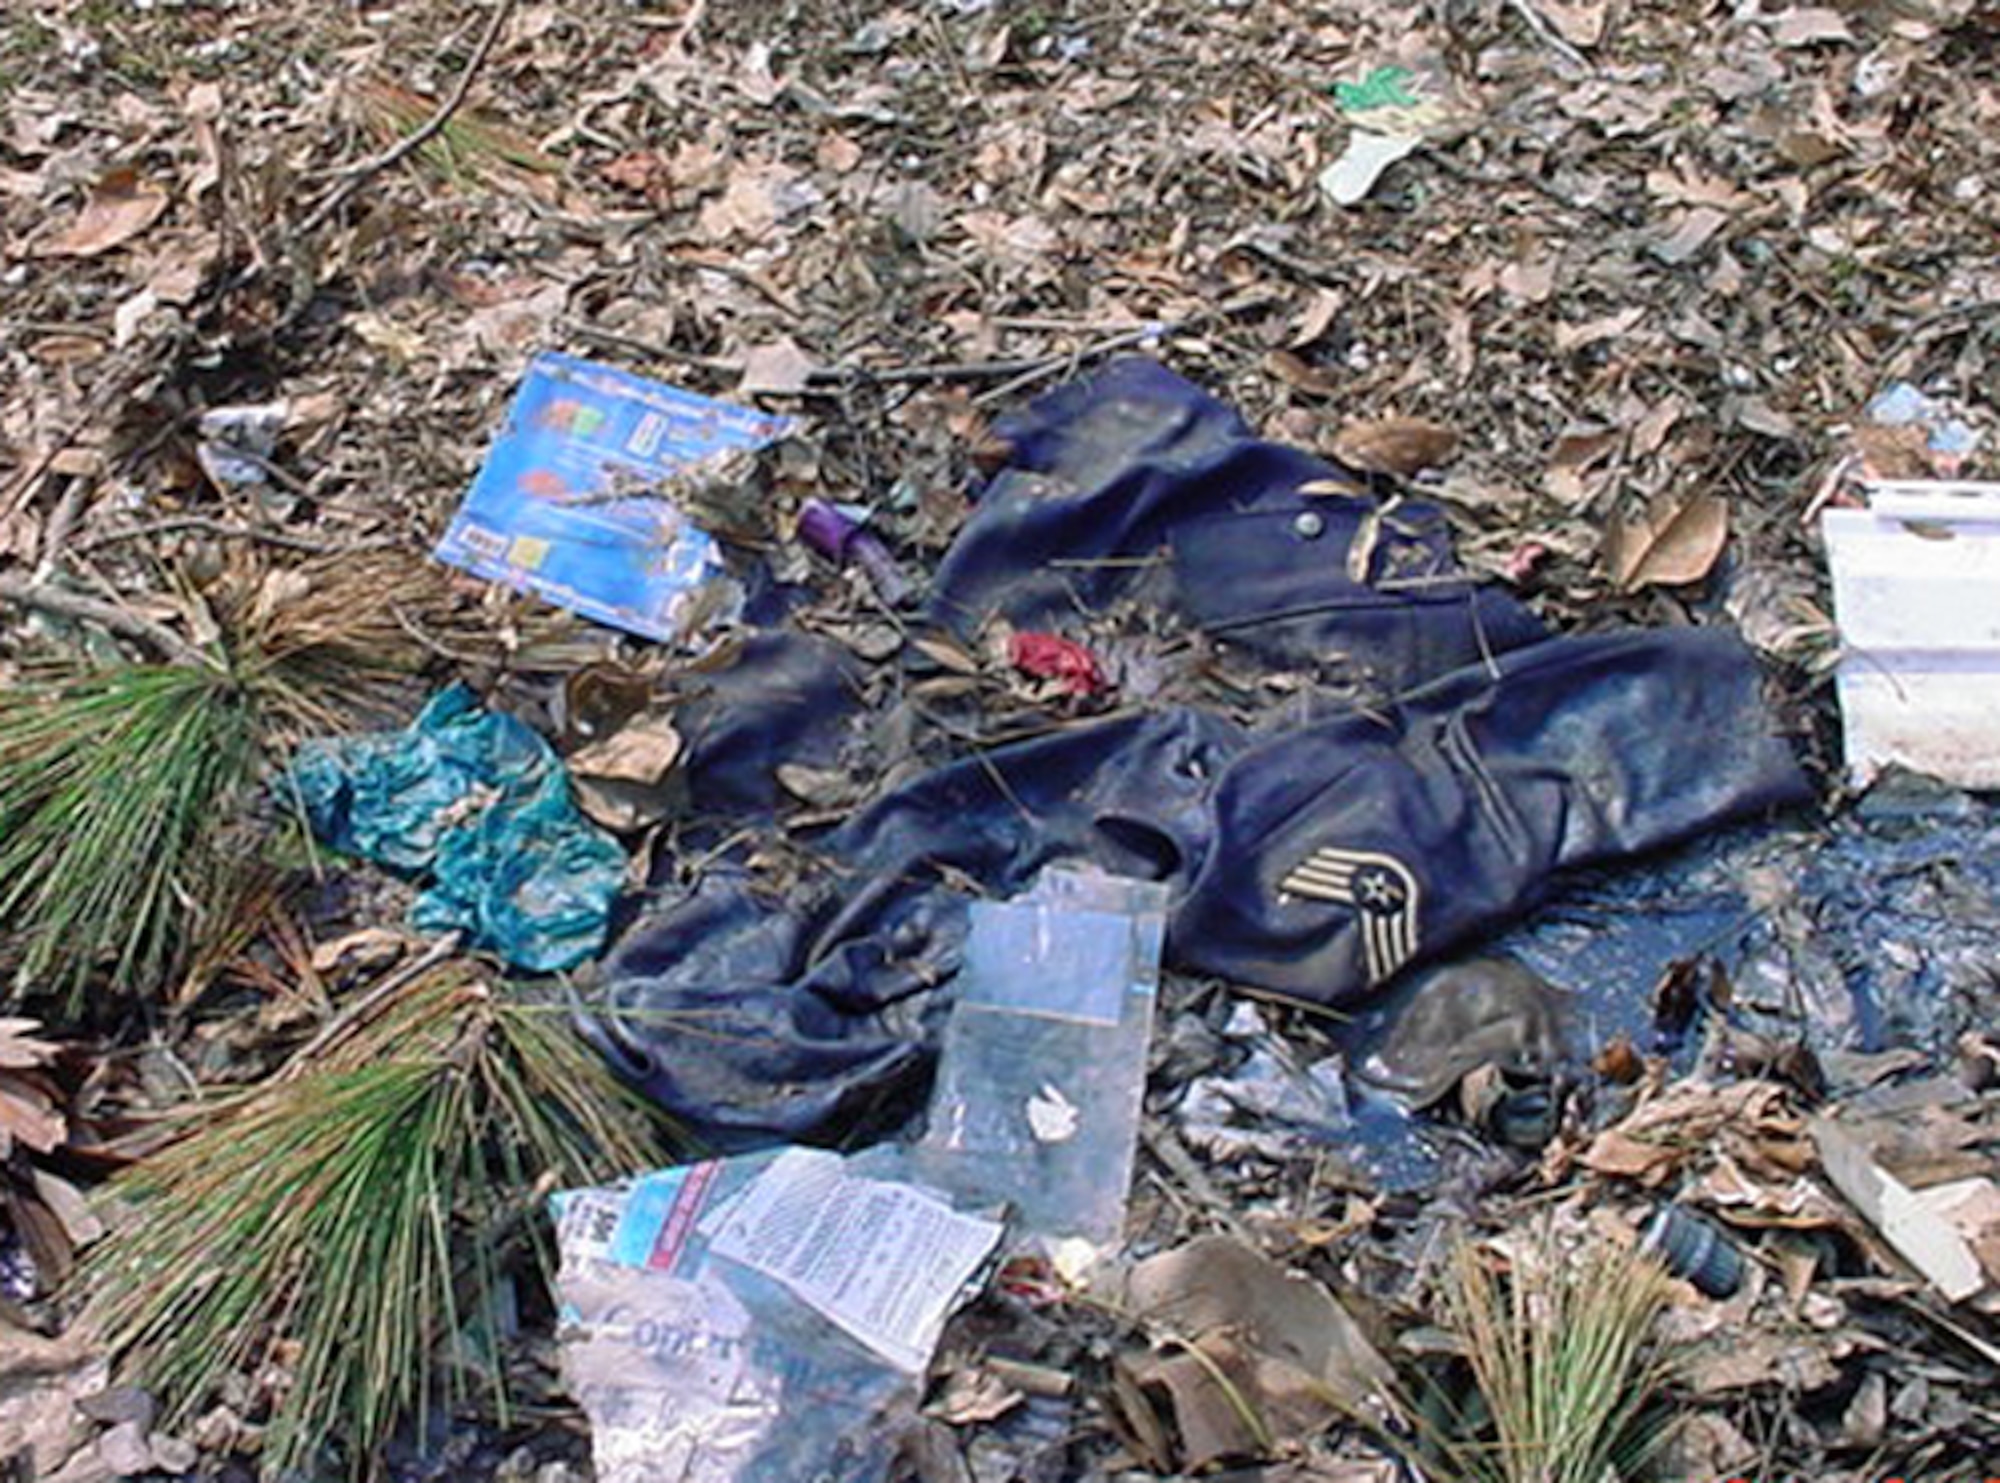 The enlisted uniforms of 1st Lt. Dawn Clifton lie in mud and trash in front of the Cliftons' home in Ocean Springs, Miss., after Hurricane Katrina. Lieutenant Clifton, who is prior enlisted, was stationed at Keesler Air Force Base, Miss., when the hurricane devastated the Gulf Coast in August 2005. (U.S. Air Force photo) 
